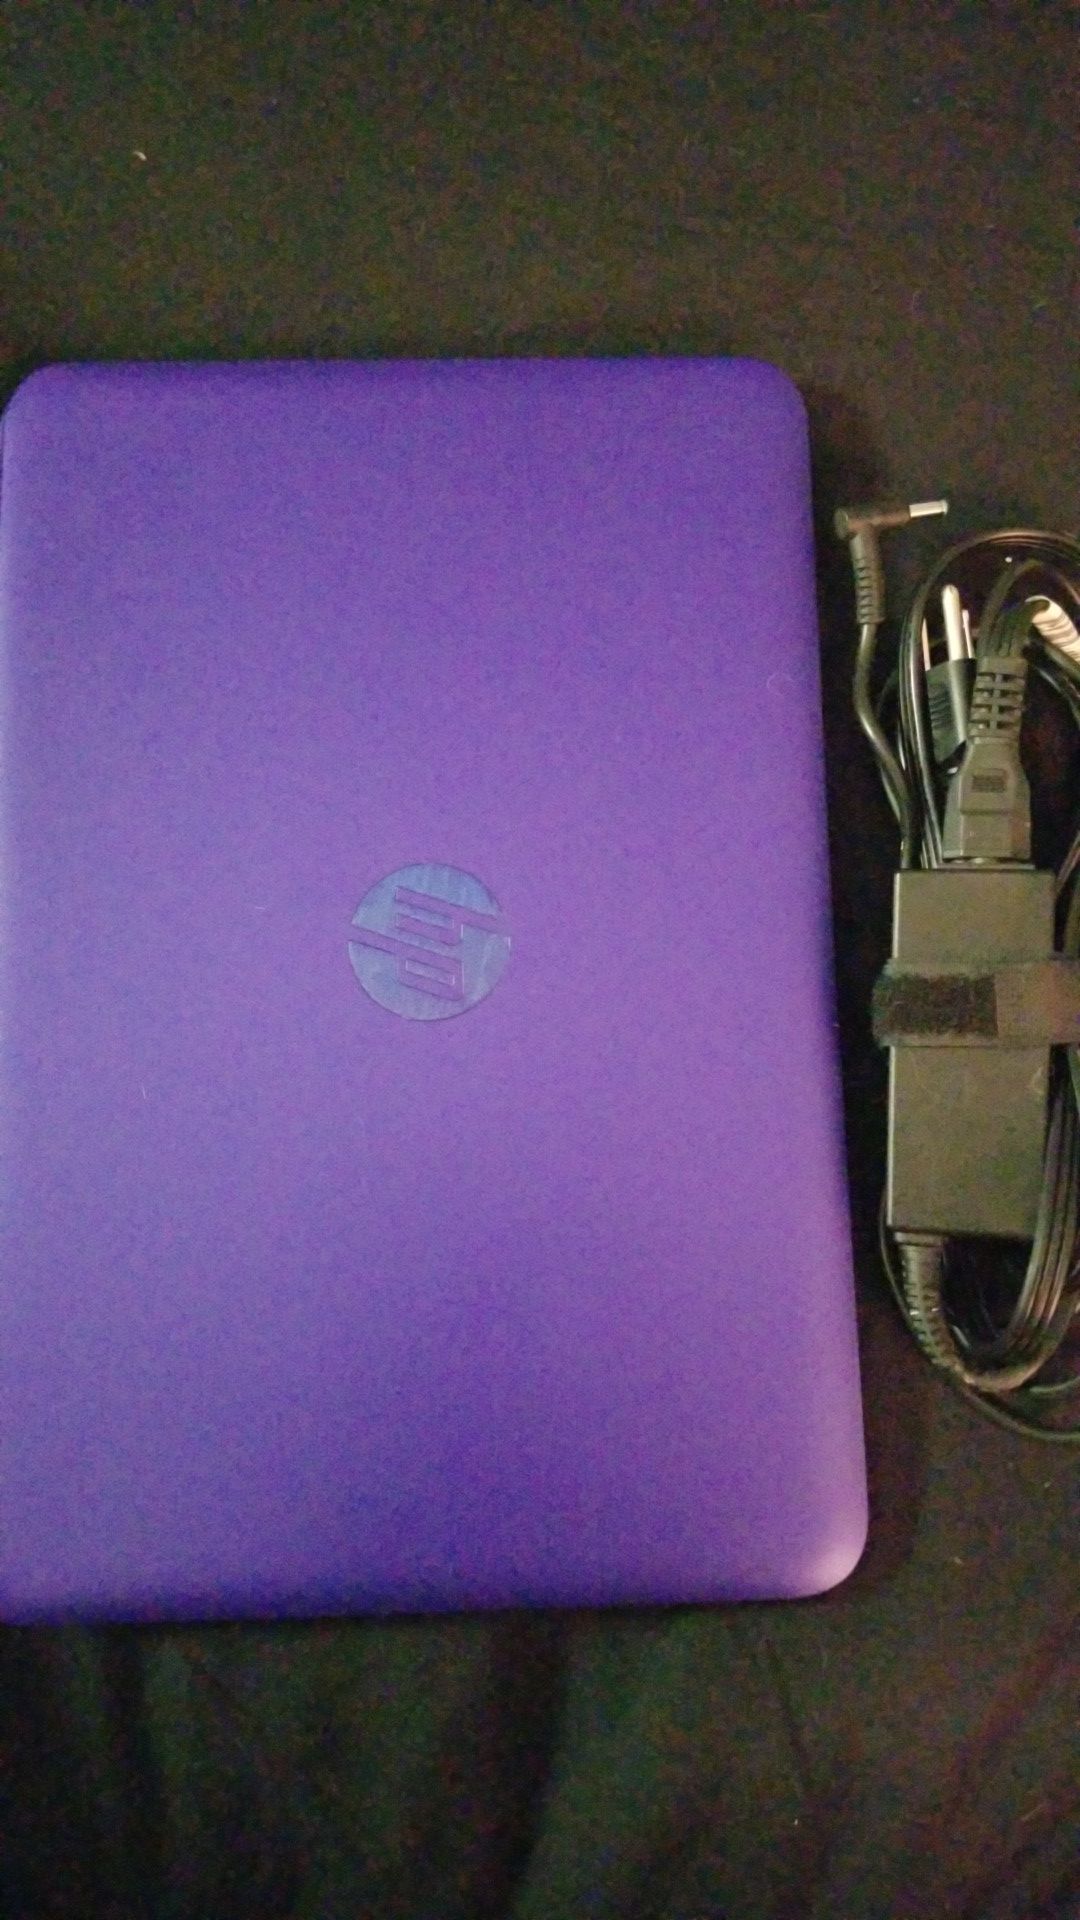 Hp Stream Notebook PC 13+ charger